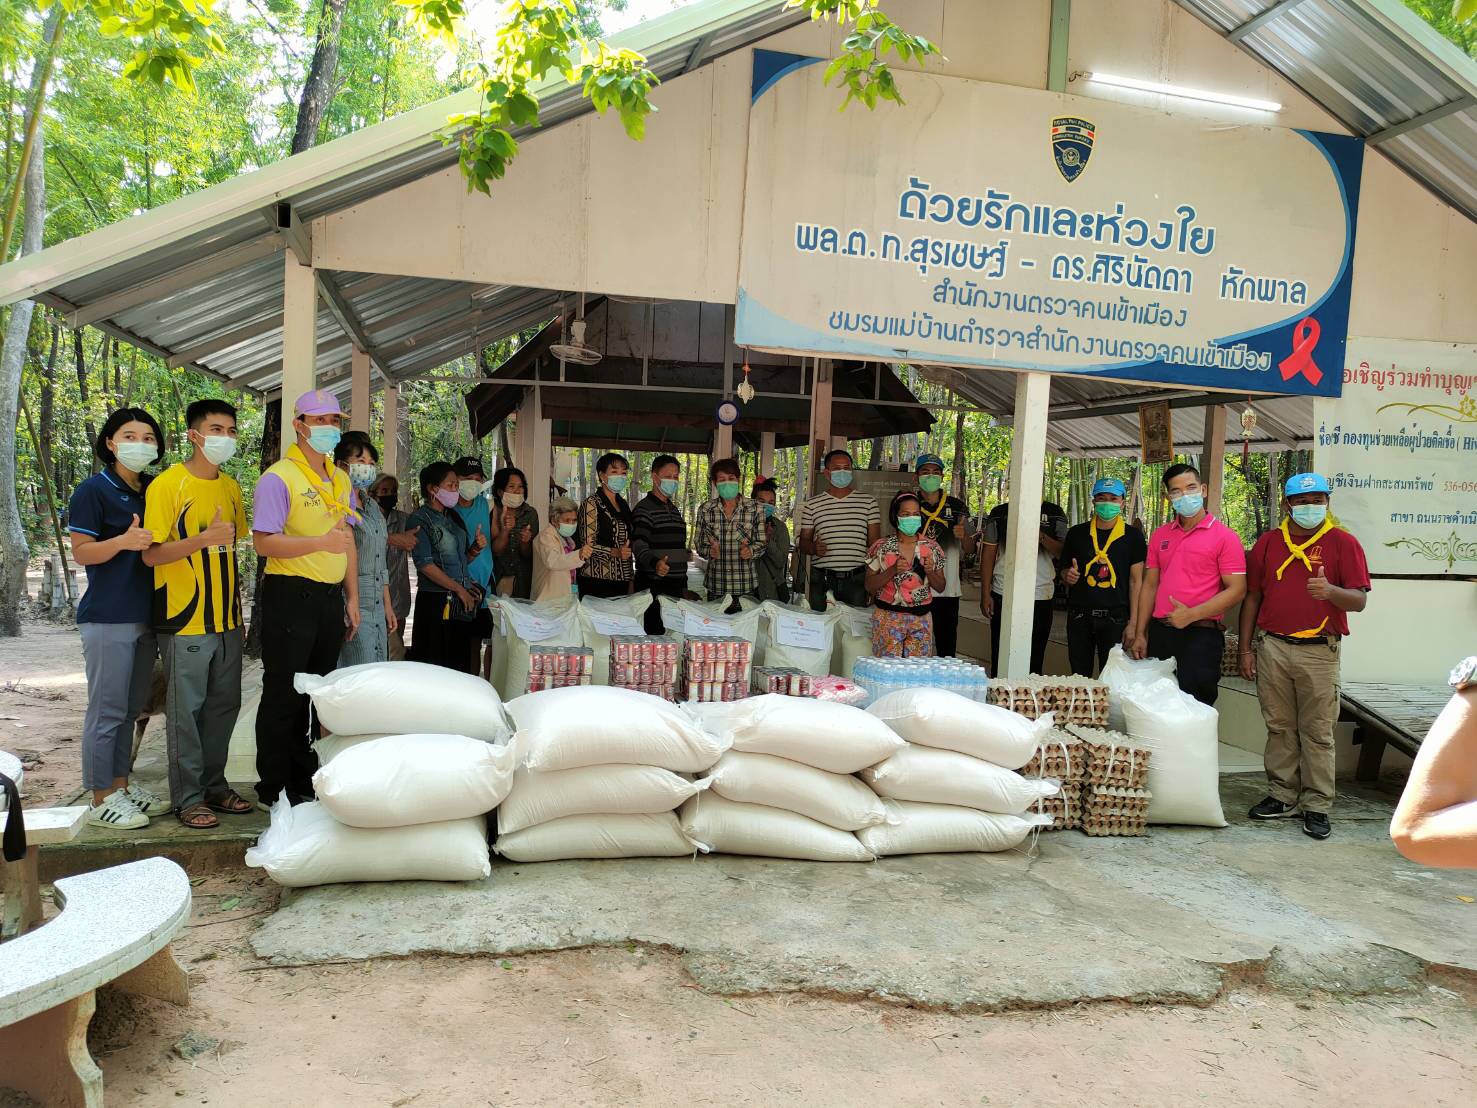 8 May 2021, in Roi Et Province